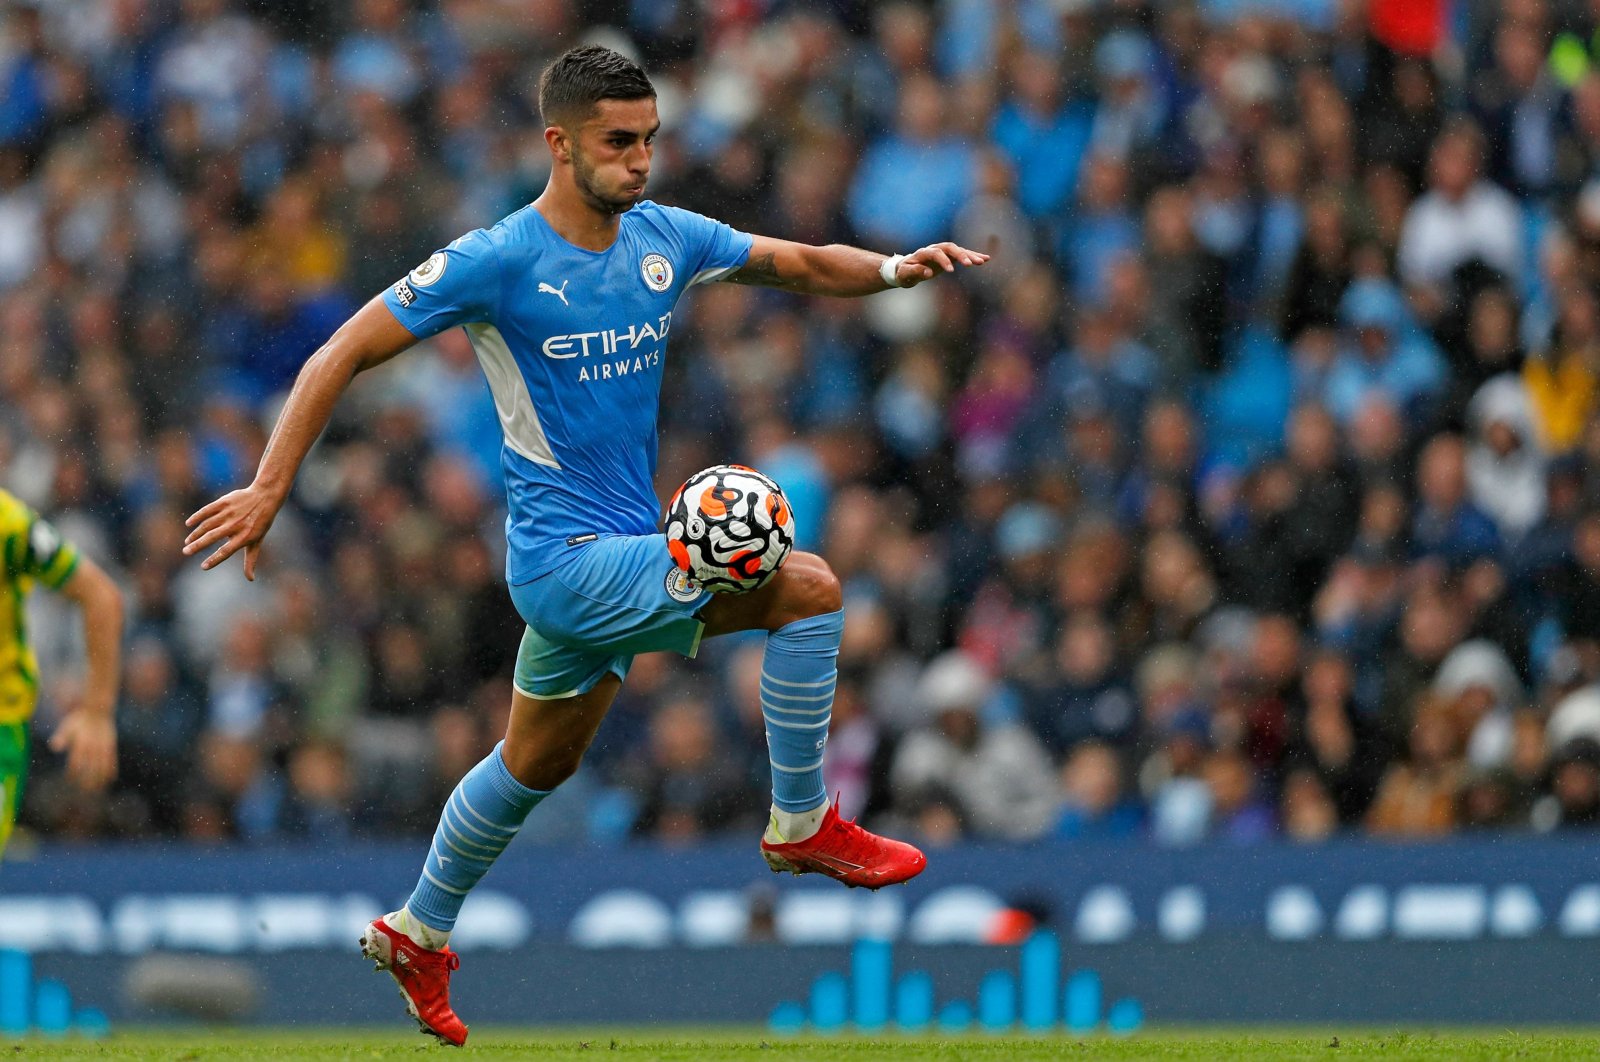 Manchester City&#039;s Ferran Torres controls the ball during a Premier League match against Norwich City at the Etihad Stadium, Manchester, England, Aug. 21, 2021. (AFP Photo)